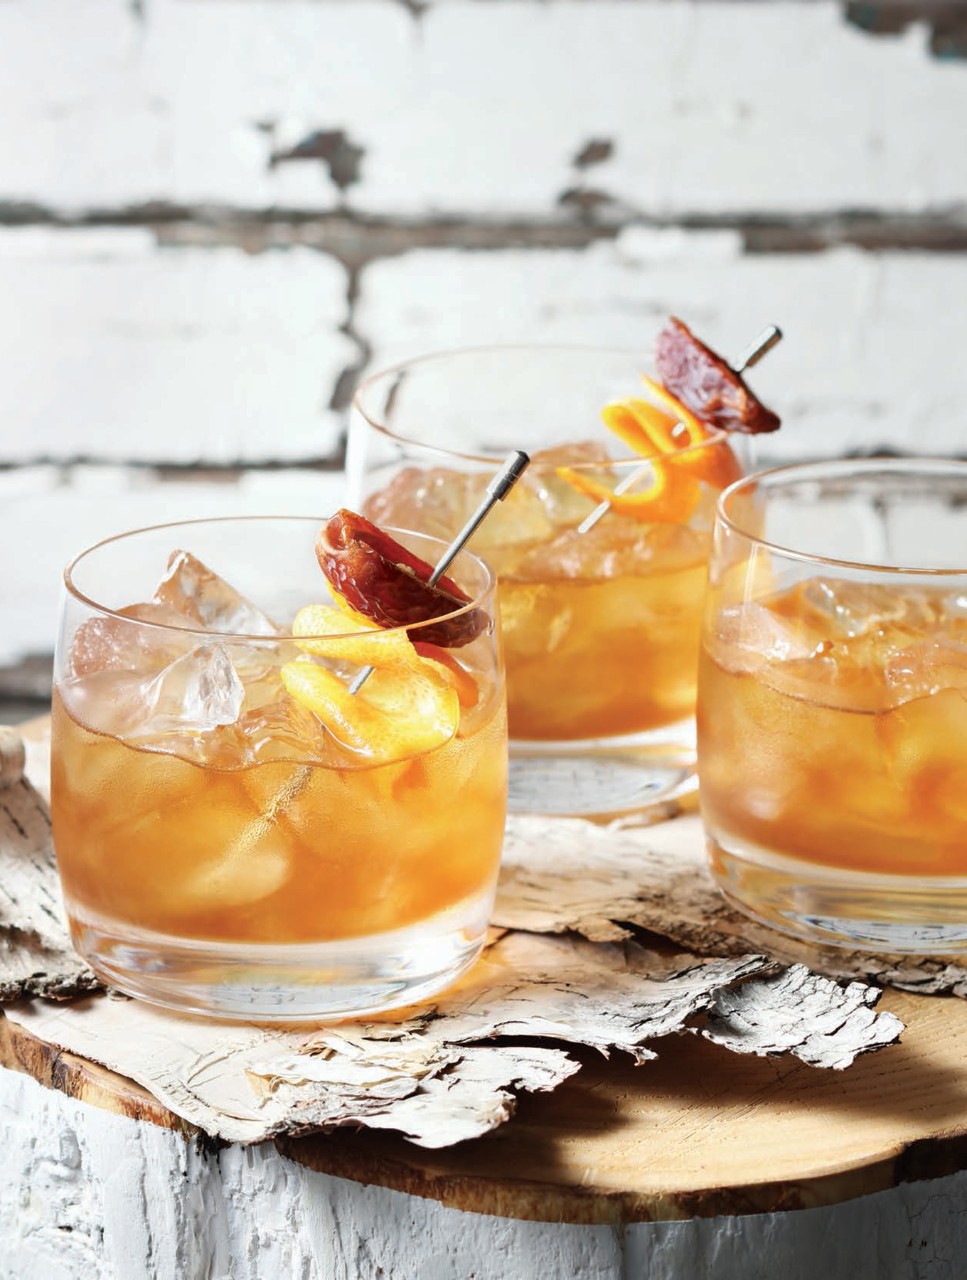 Smoked Date Old Fashioned